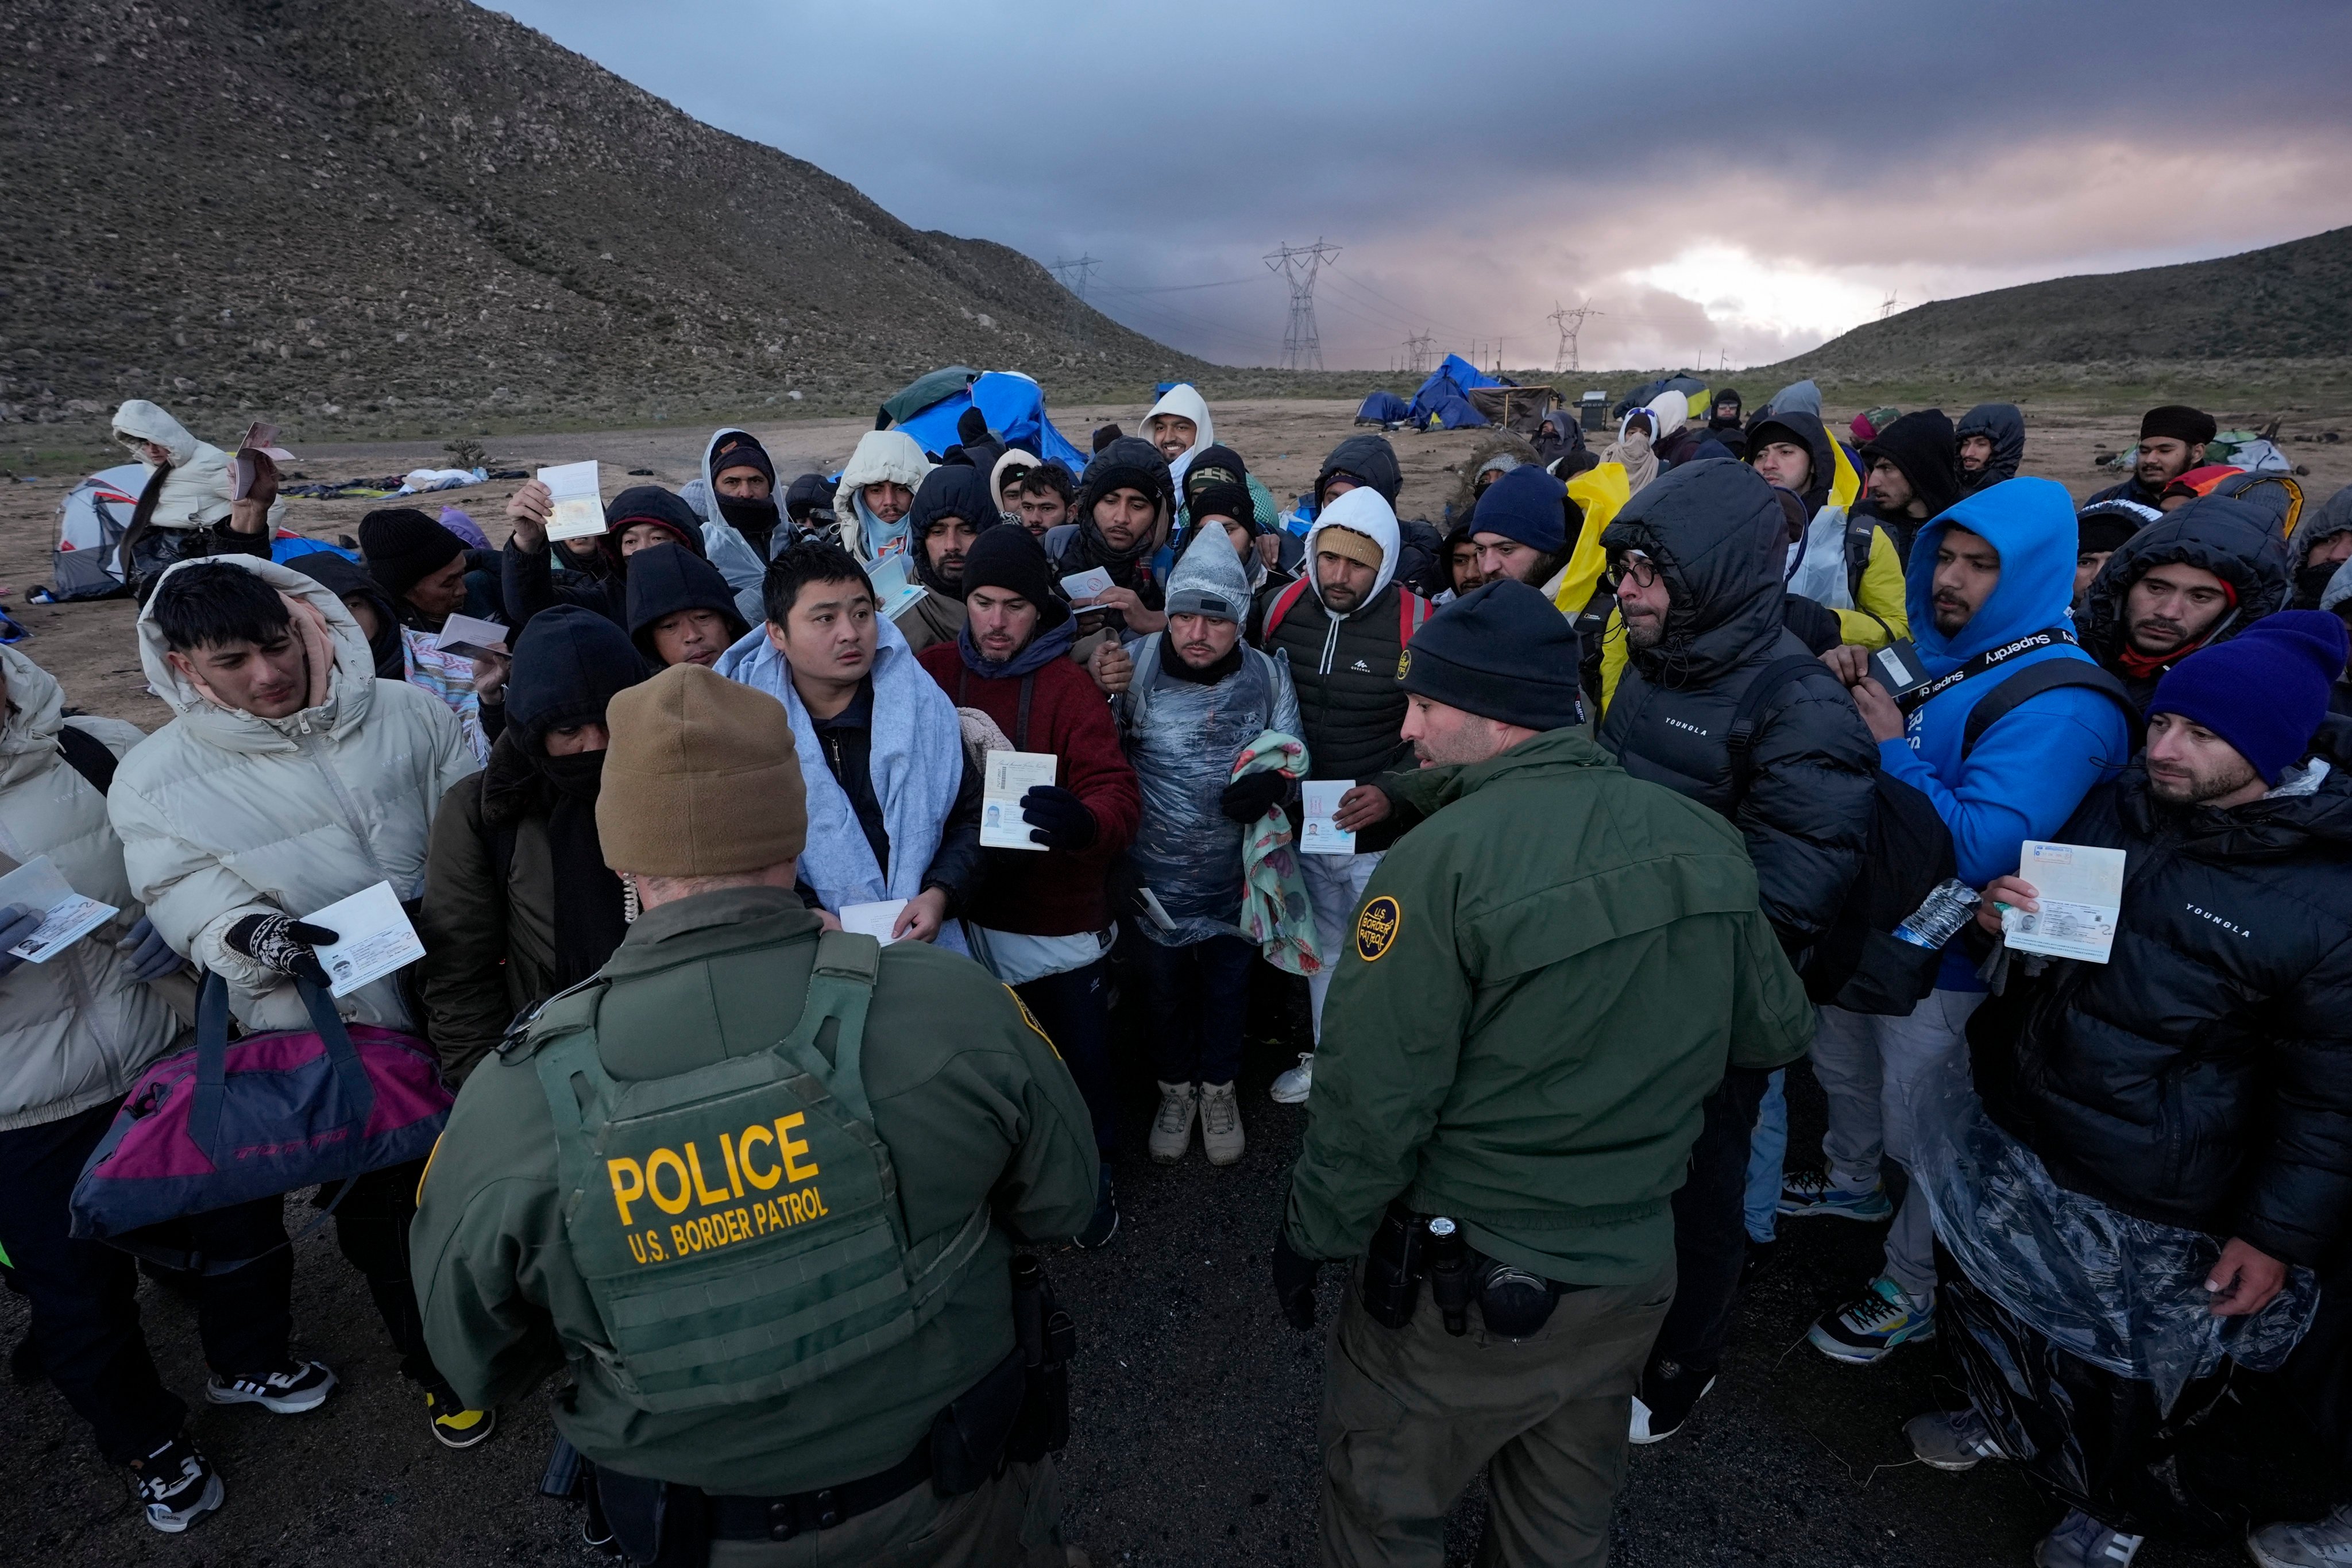 Migrants after crossing the border between Mexico and the US, near Jacumba, California. Photo: AP